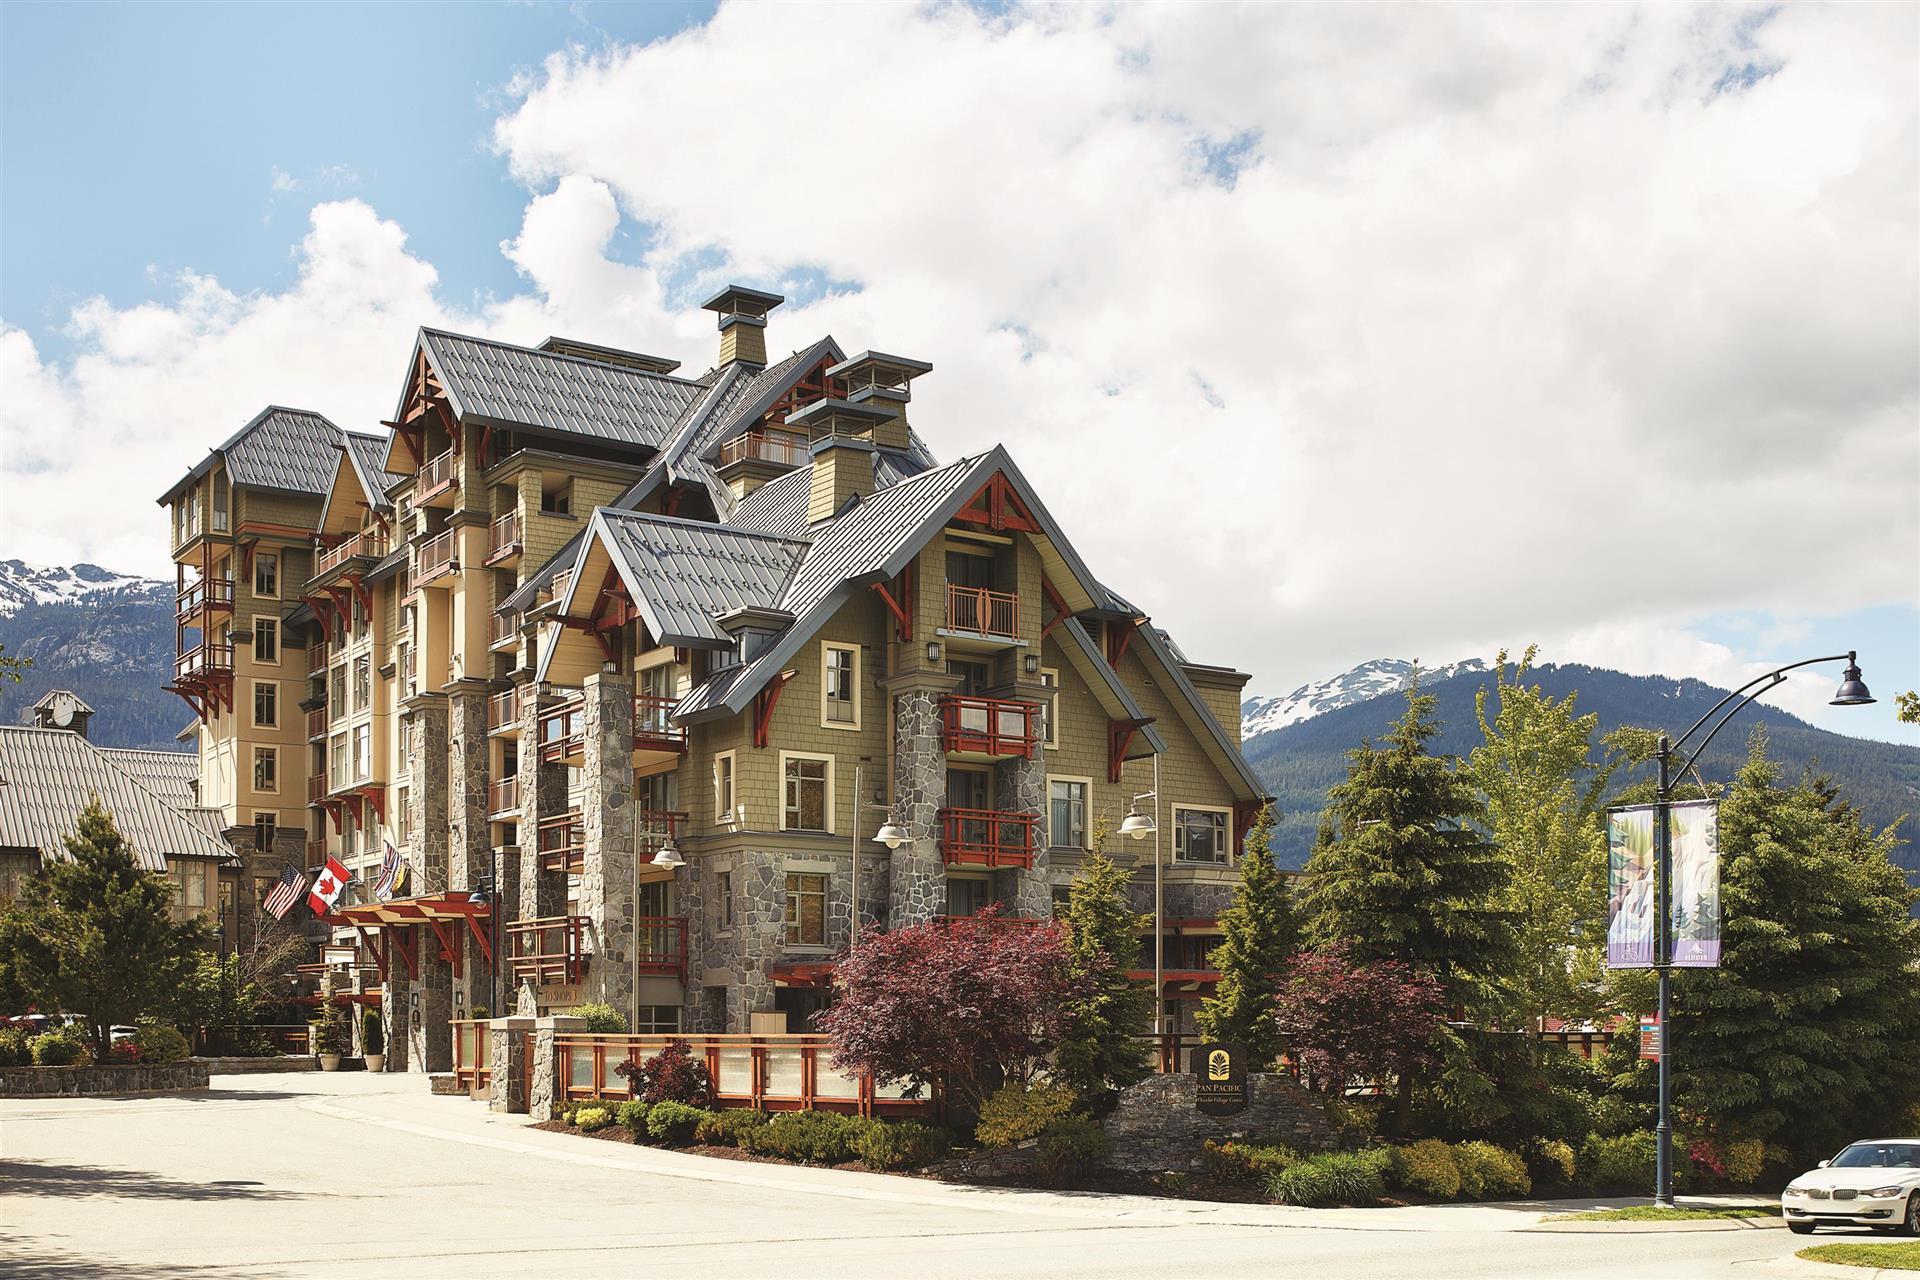 Pan Pacific Whistler Village Centre in Whistler, BC